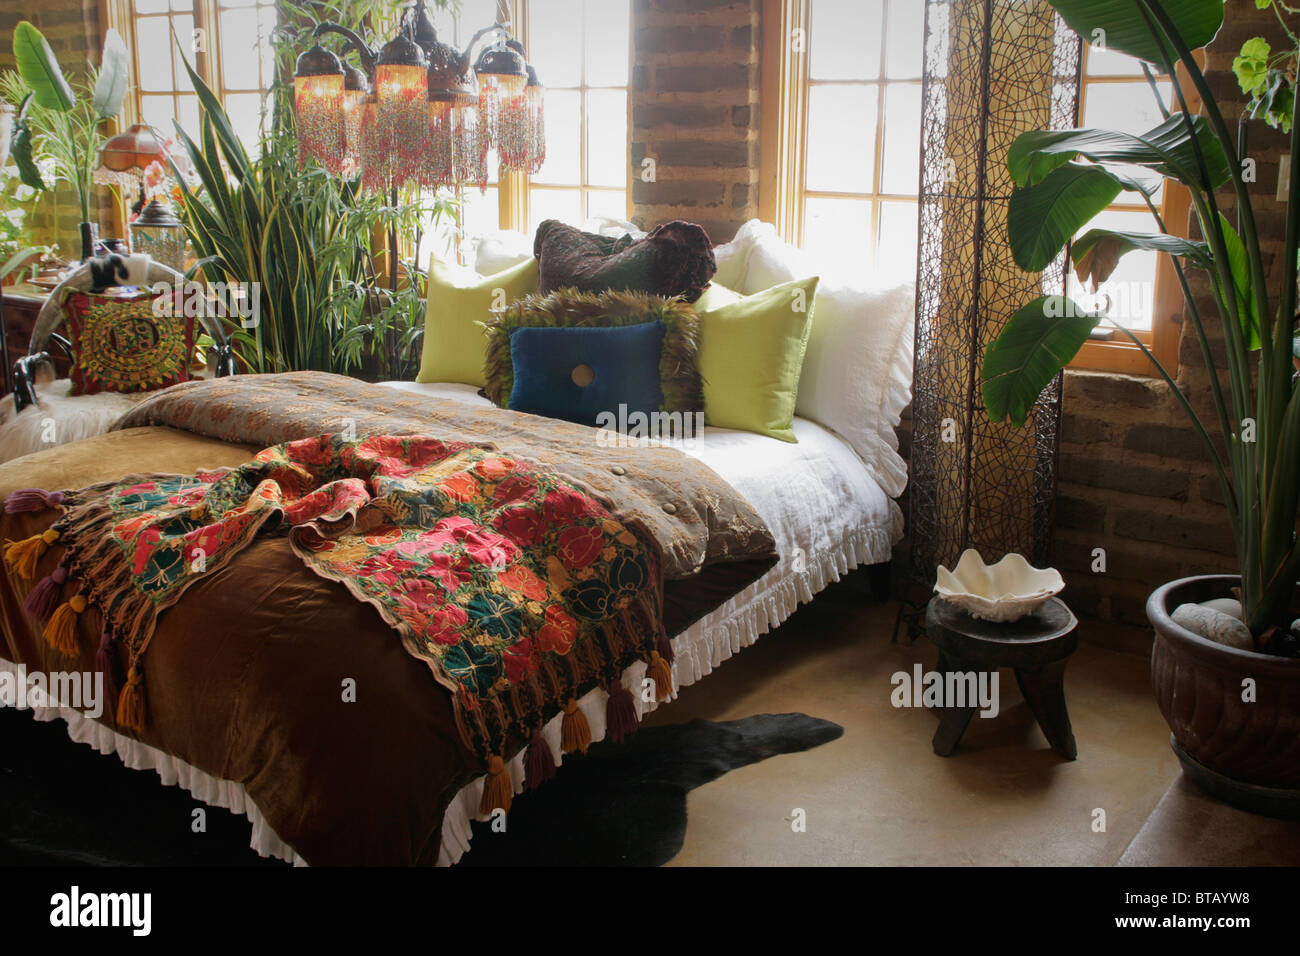 https://c8.alamy.com/comp/BTAYW8/colorful-bed-runner-and-throw-pillows-on-bed-BTAYW8.jpg